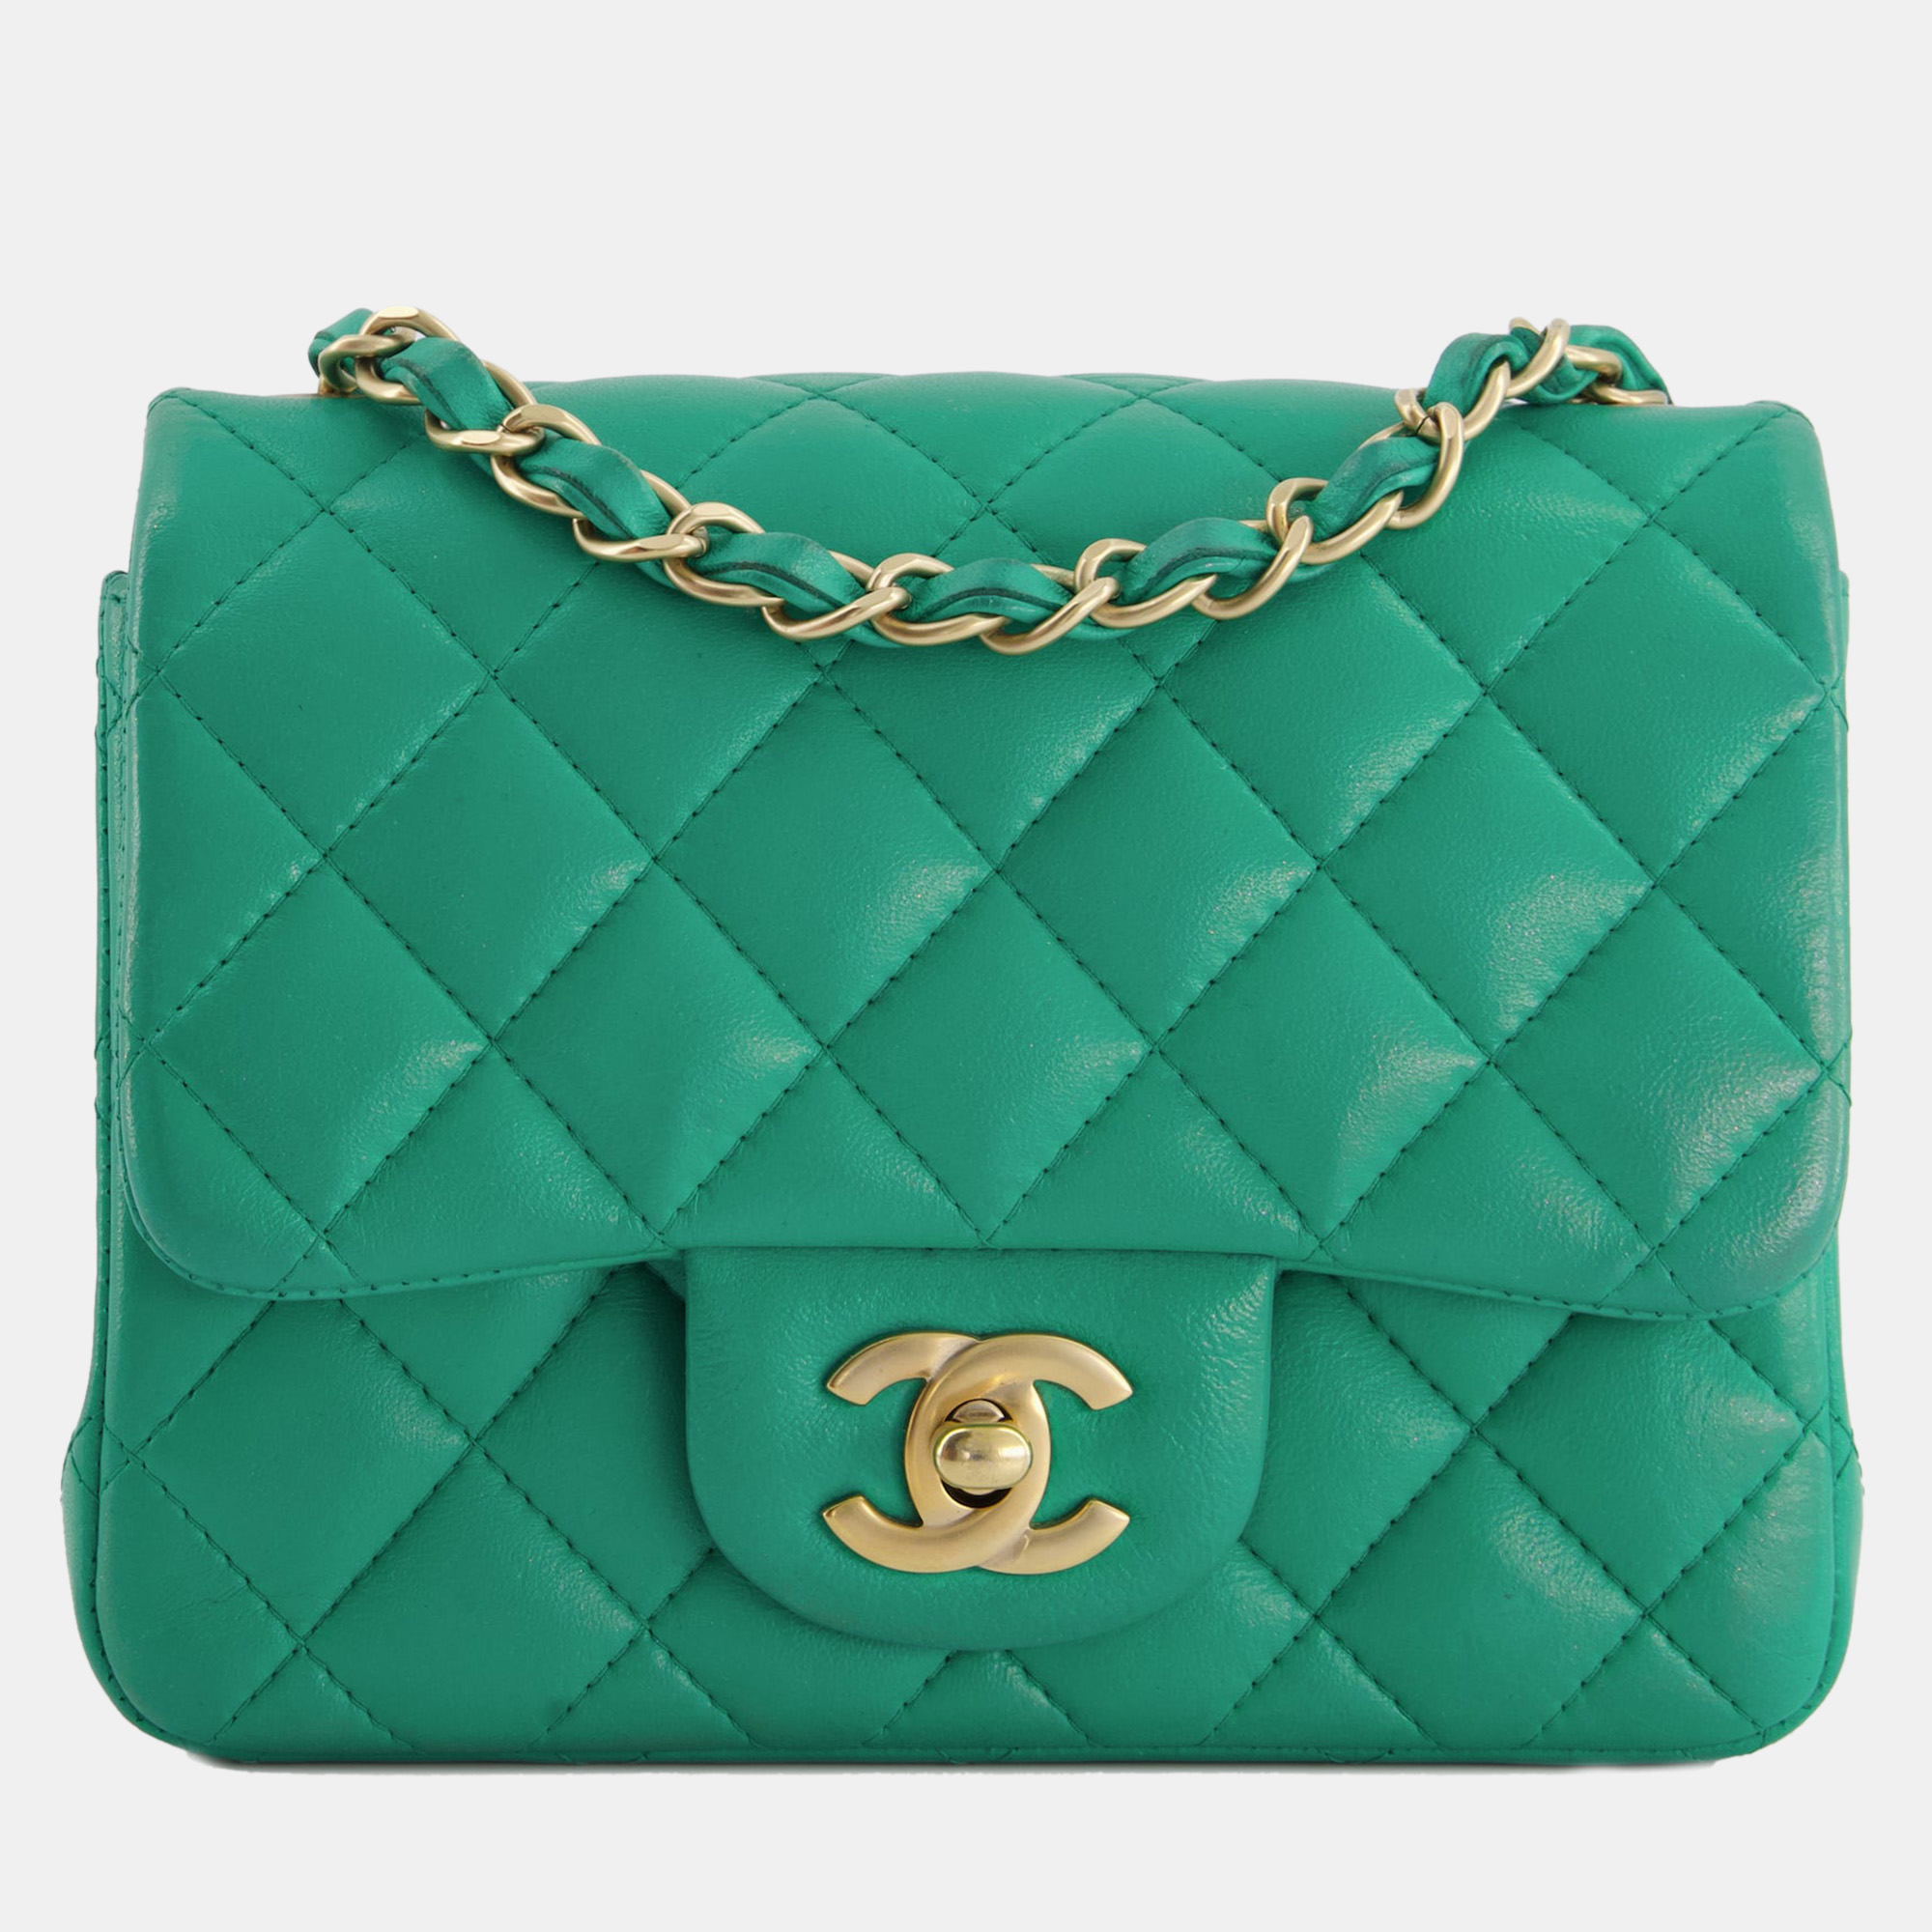 Chanel Emerald Green Mini Square Bag In Lambskin Leather With Brushed Gold Hardware